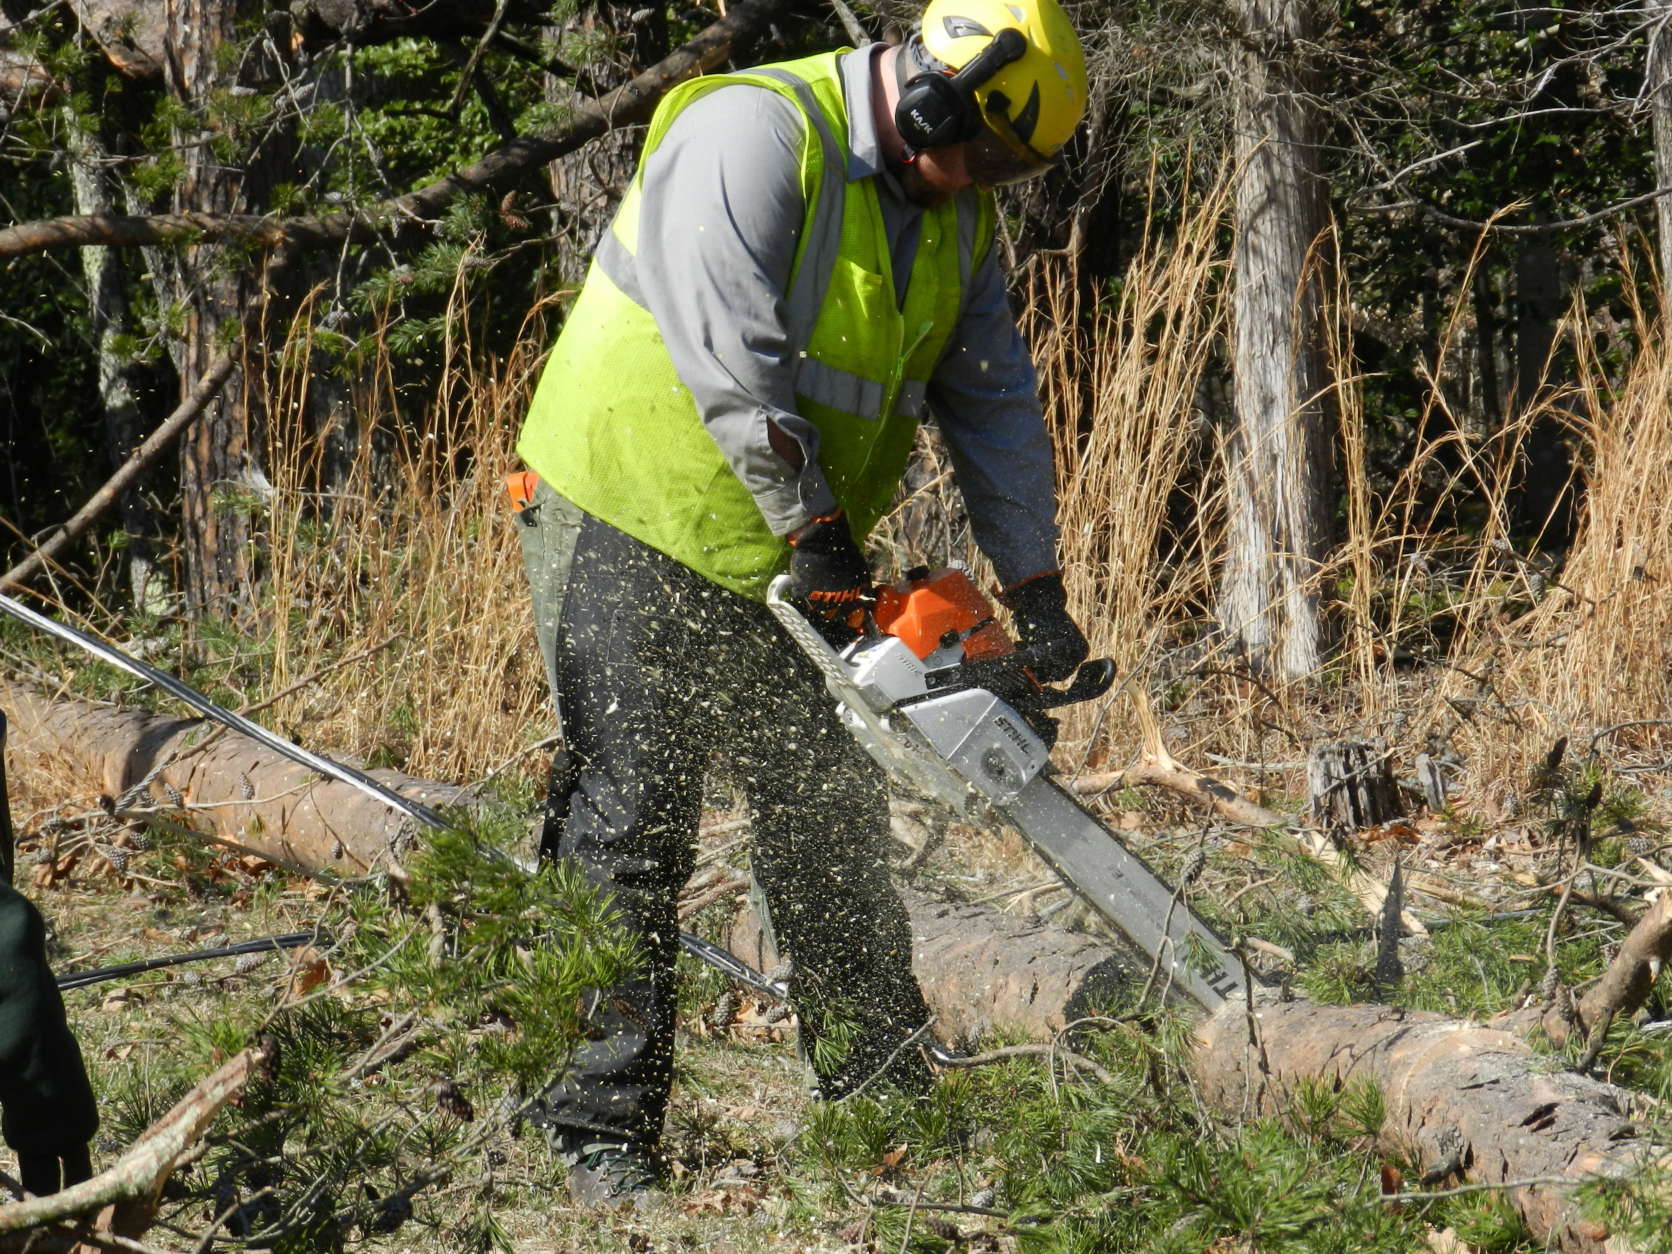 A National Park Service worker cuts a fallen tree at Prince William Forest Park. Over 800 fallen and hazardous trees had been cleared as of Tuesday. (Courtesy National Park Service)